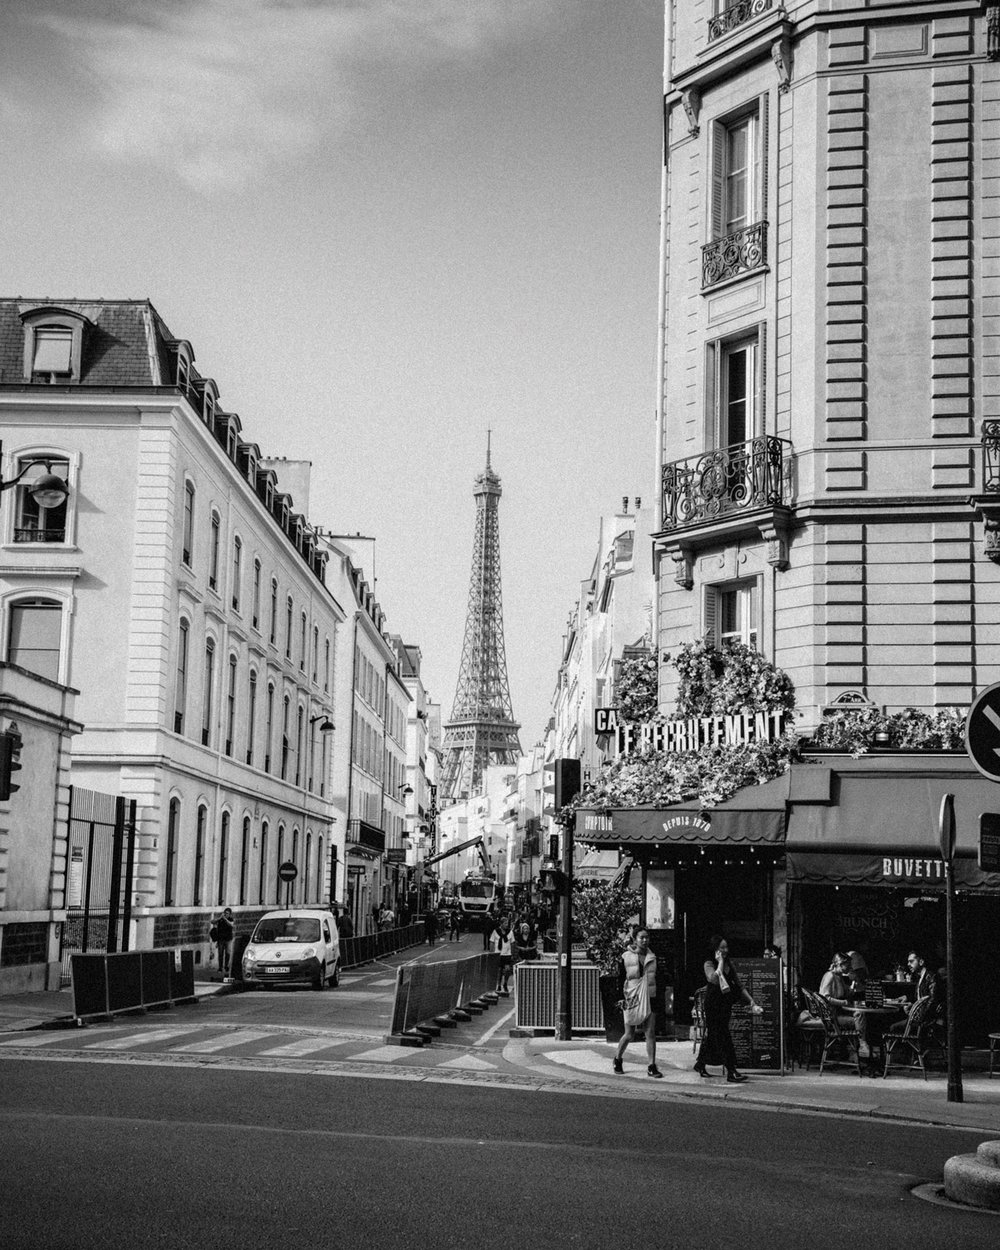 The Eiffel Tower, seen from between apartments and a café on a Paris street.